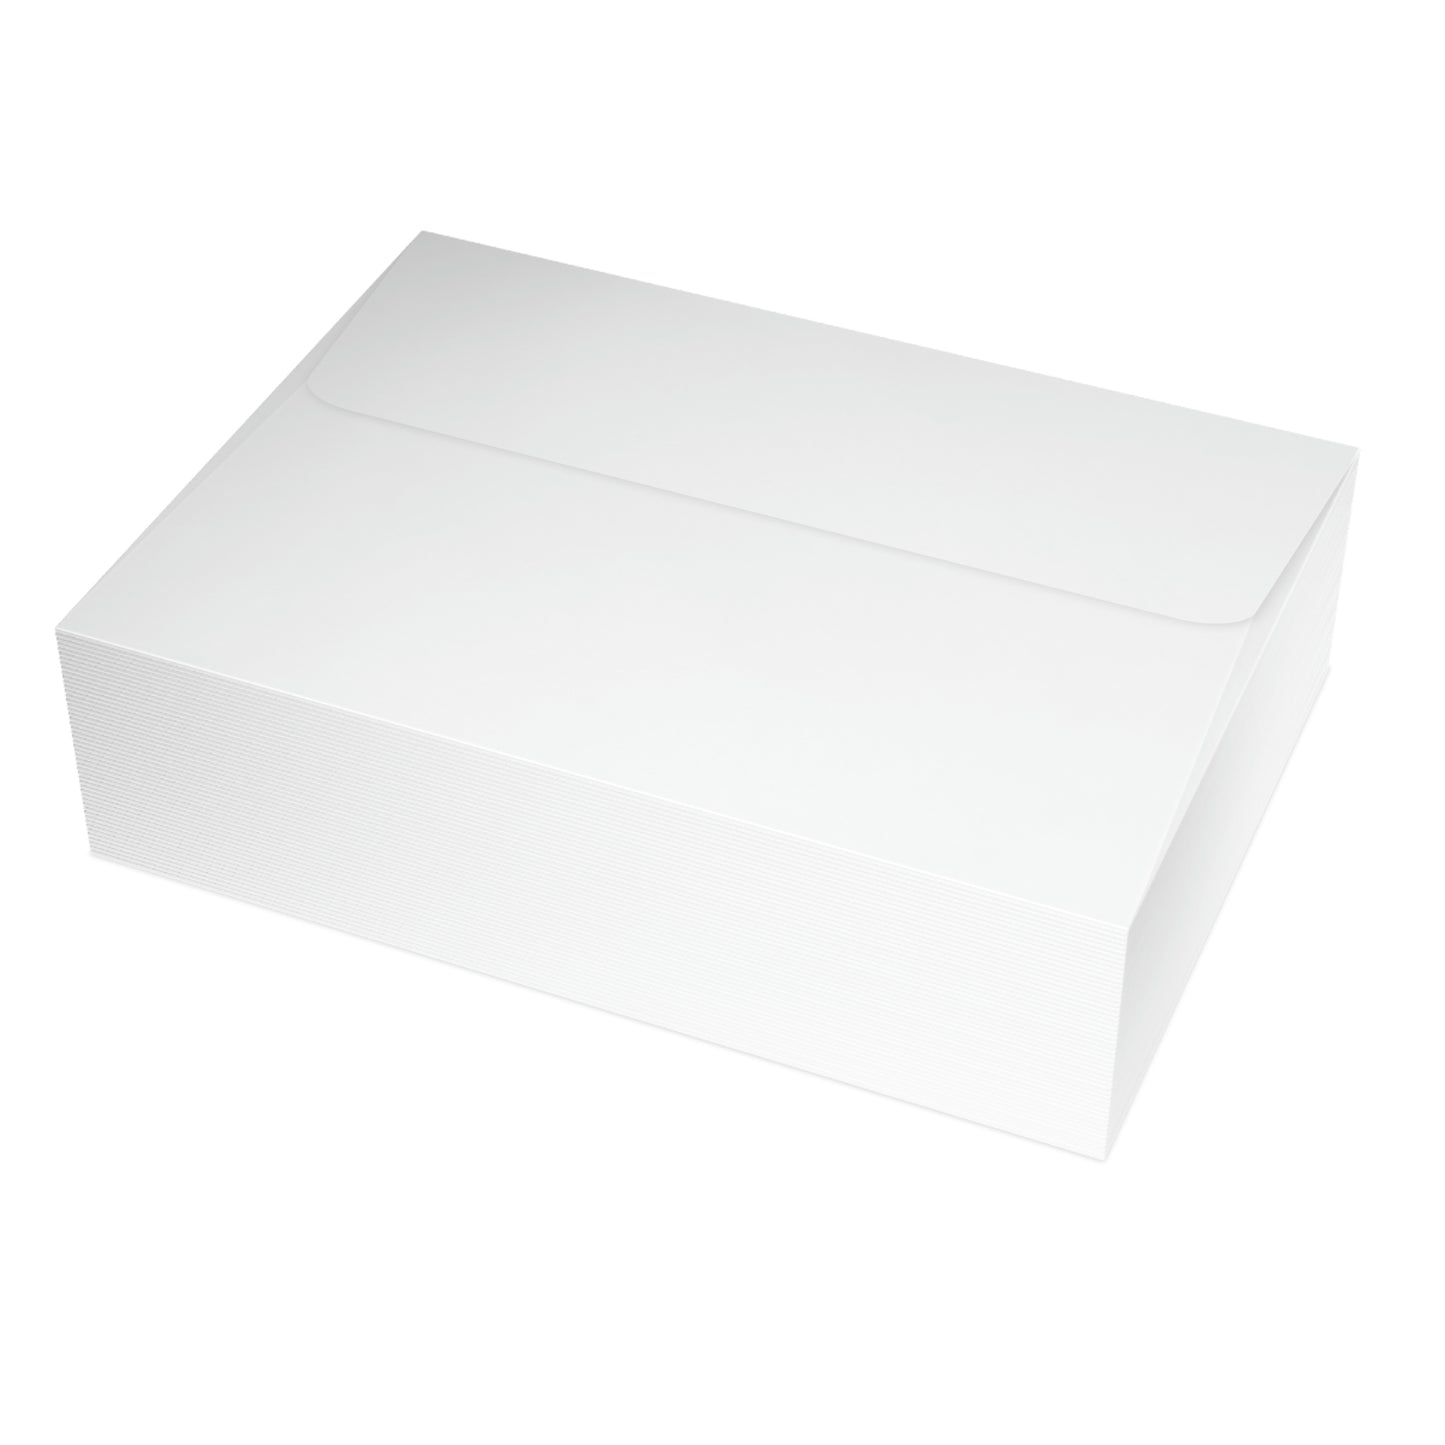 Folded Greeting Cards Horizontal (1, 10, 30, and 50pcs) Stay Focused - Design No.300